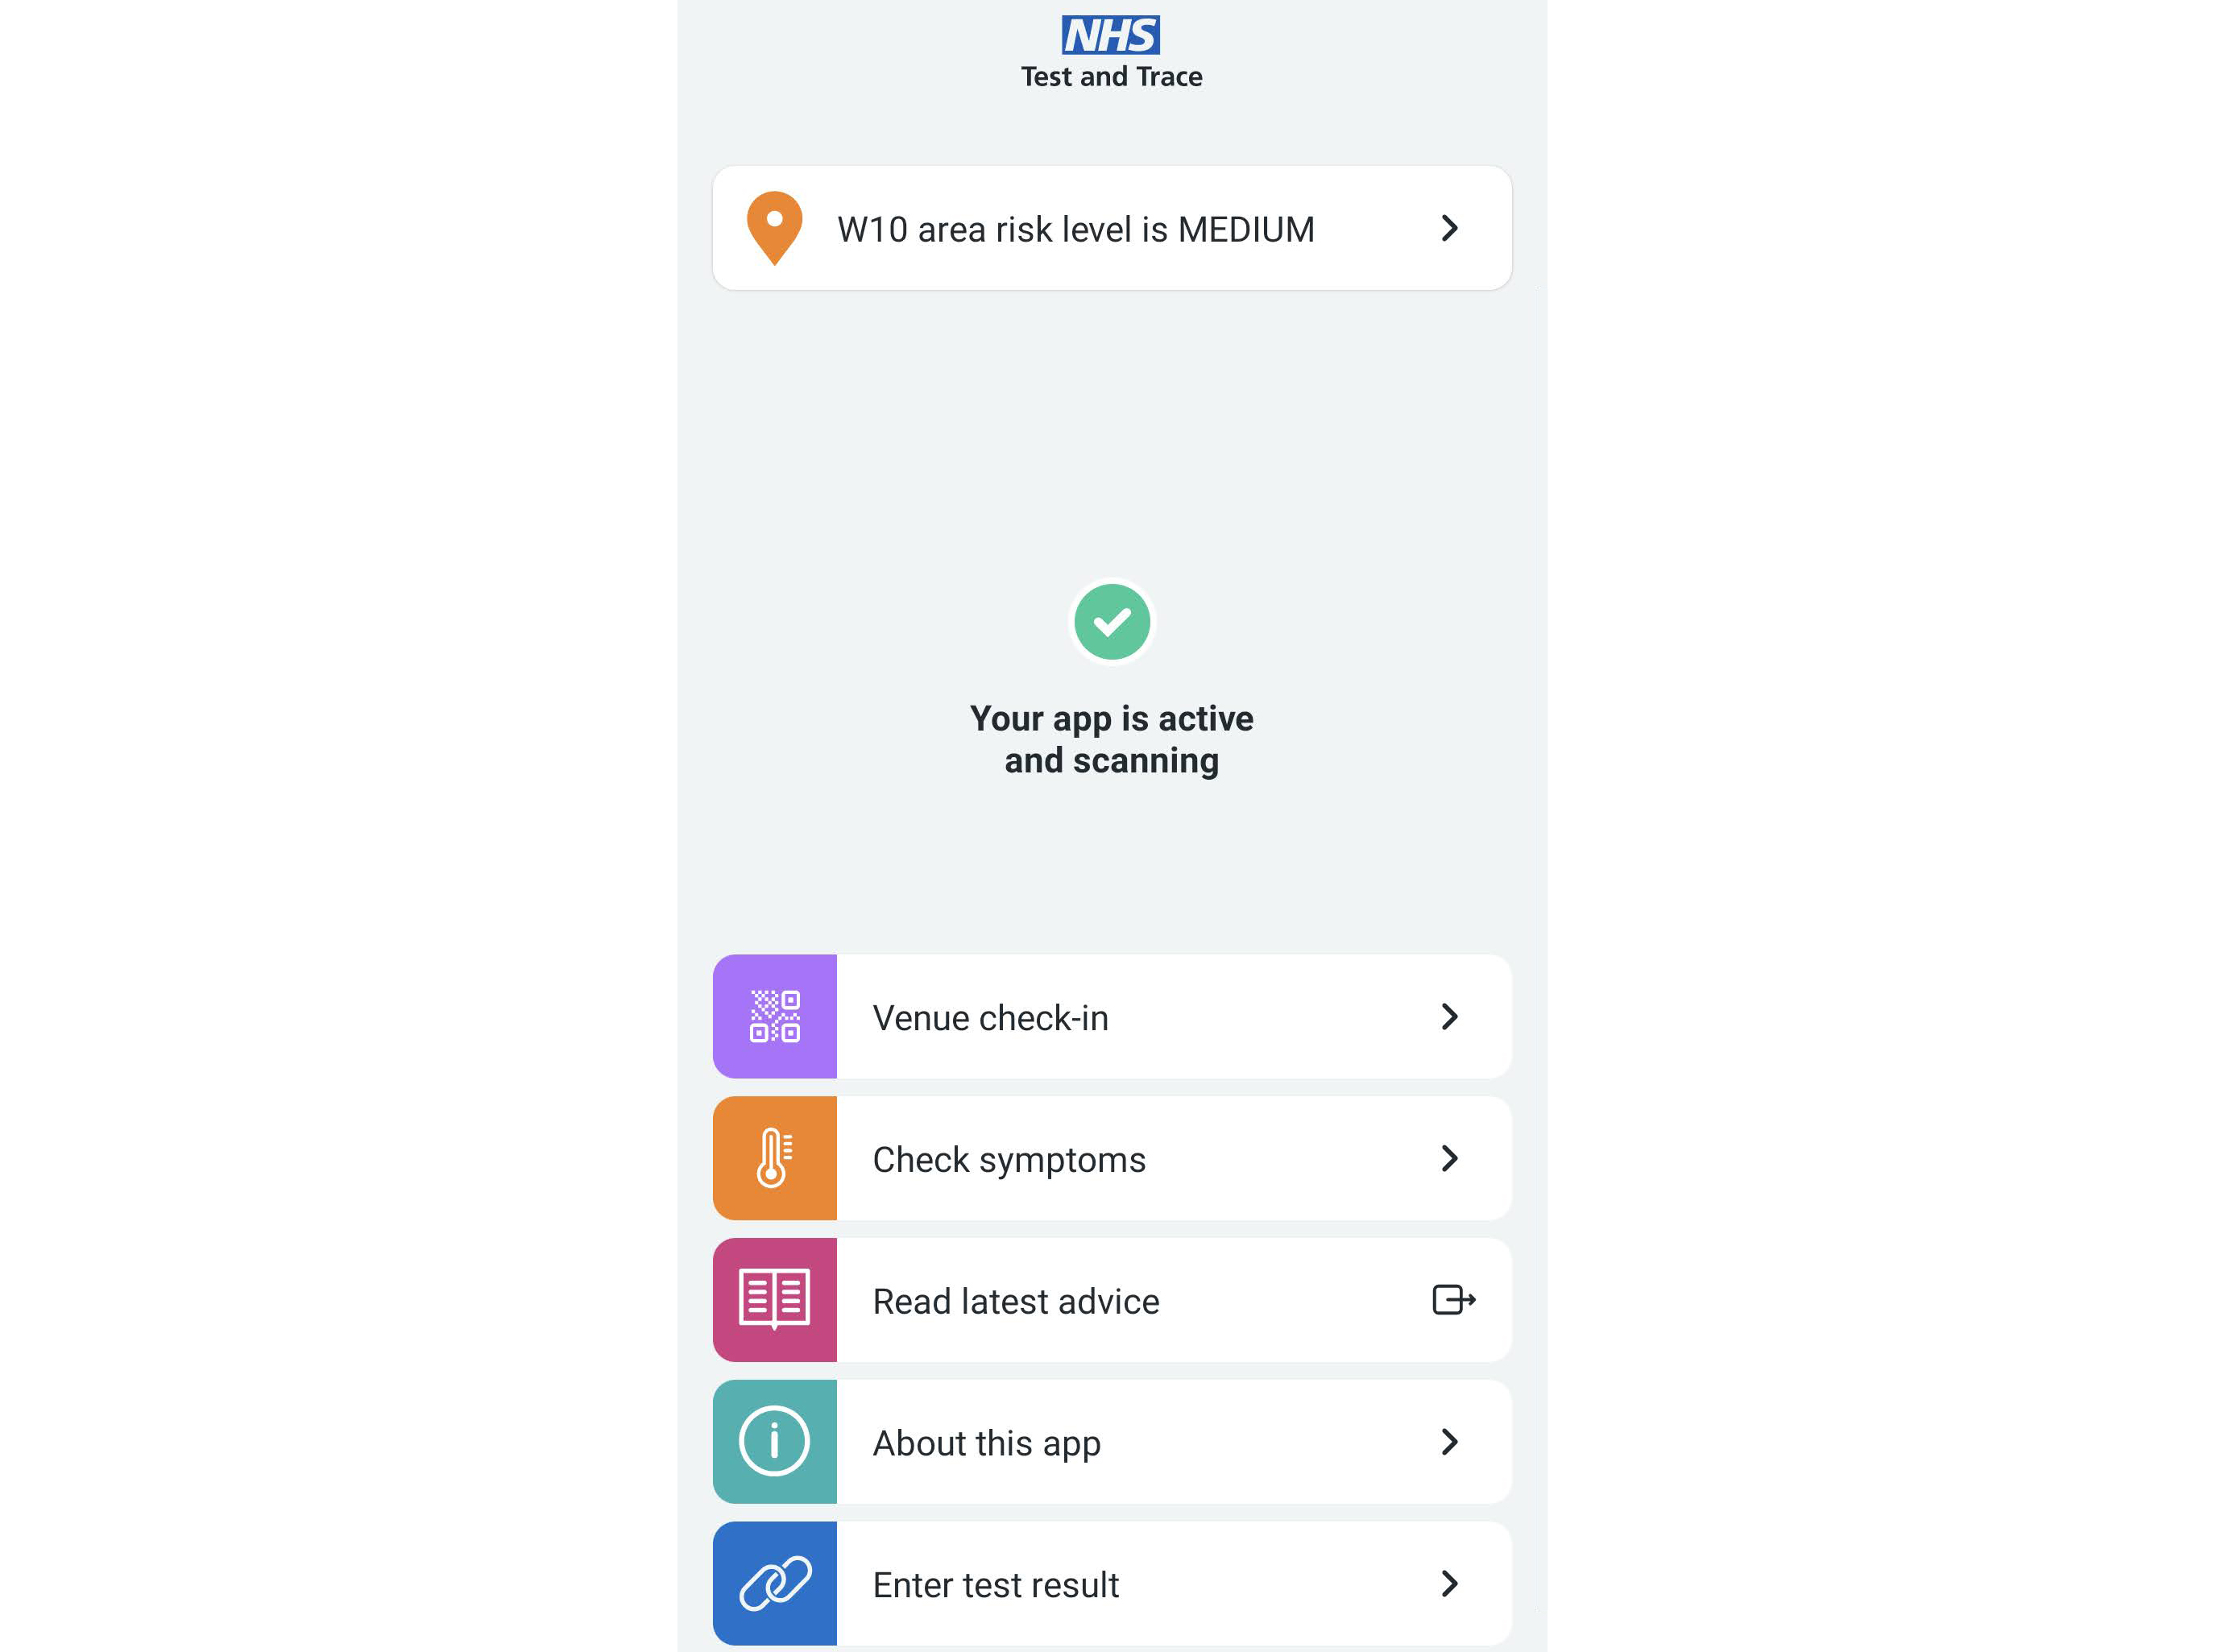 The main page on the NHS Covid-19 app